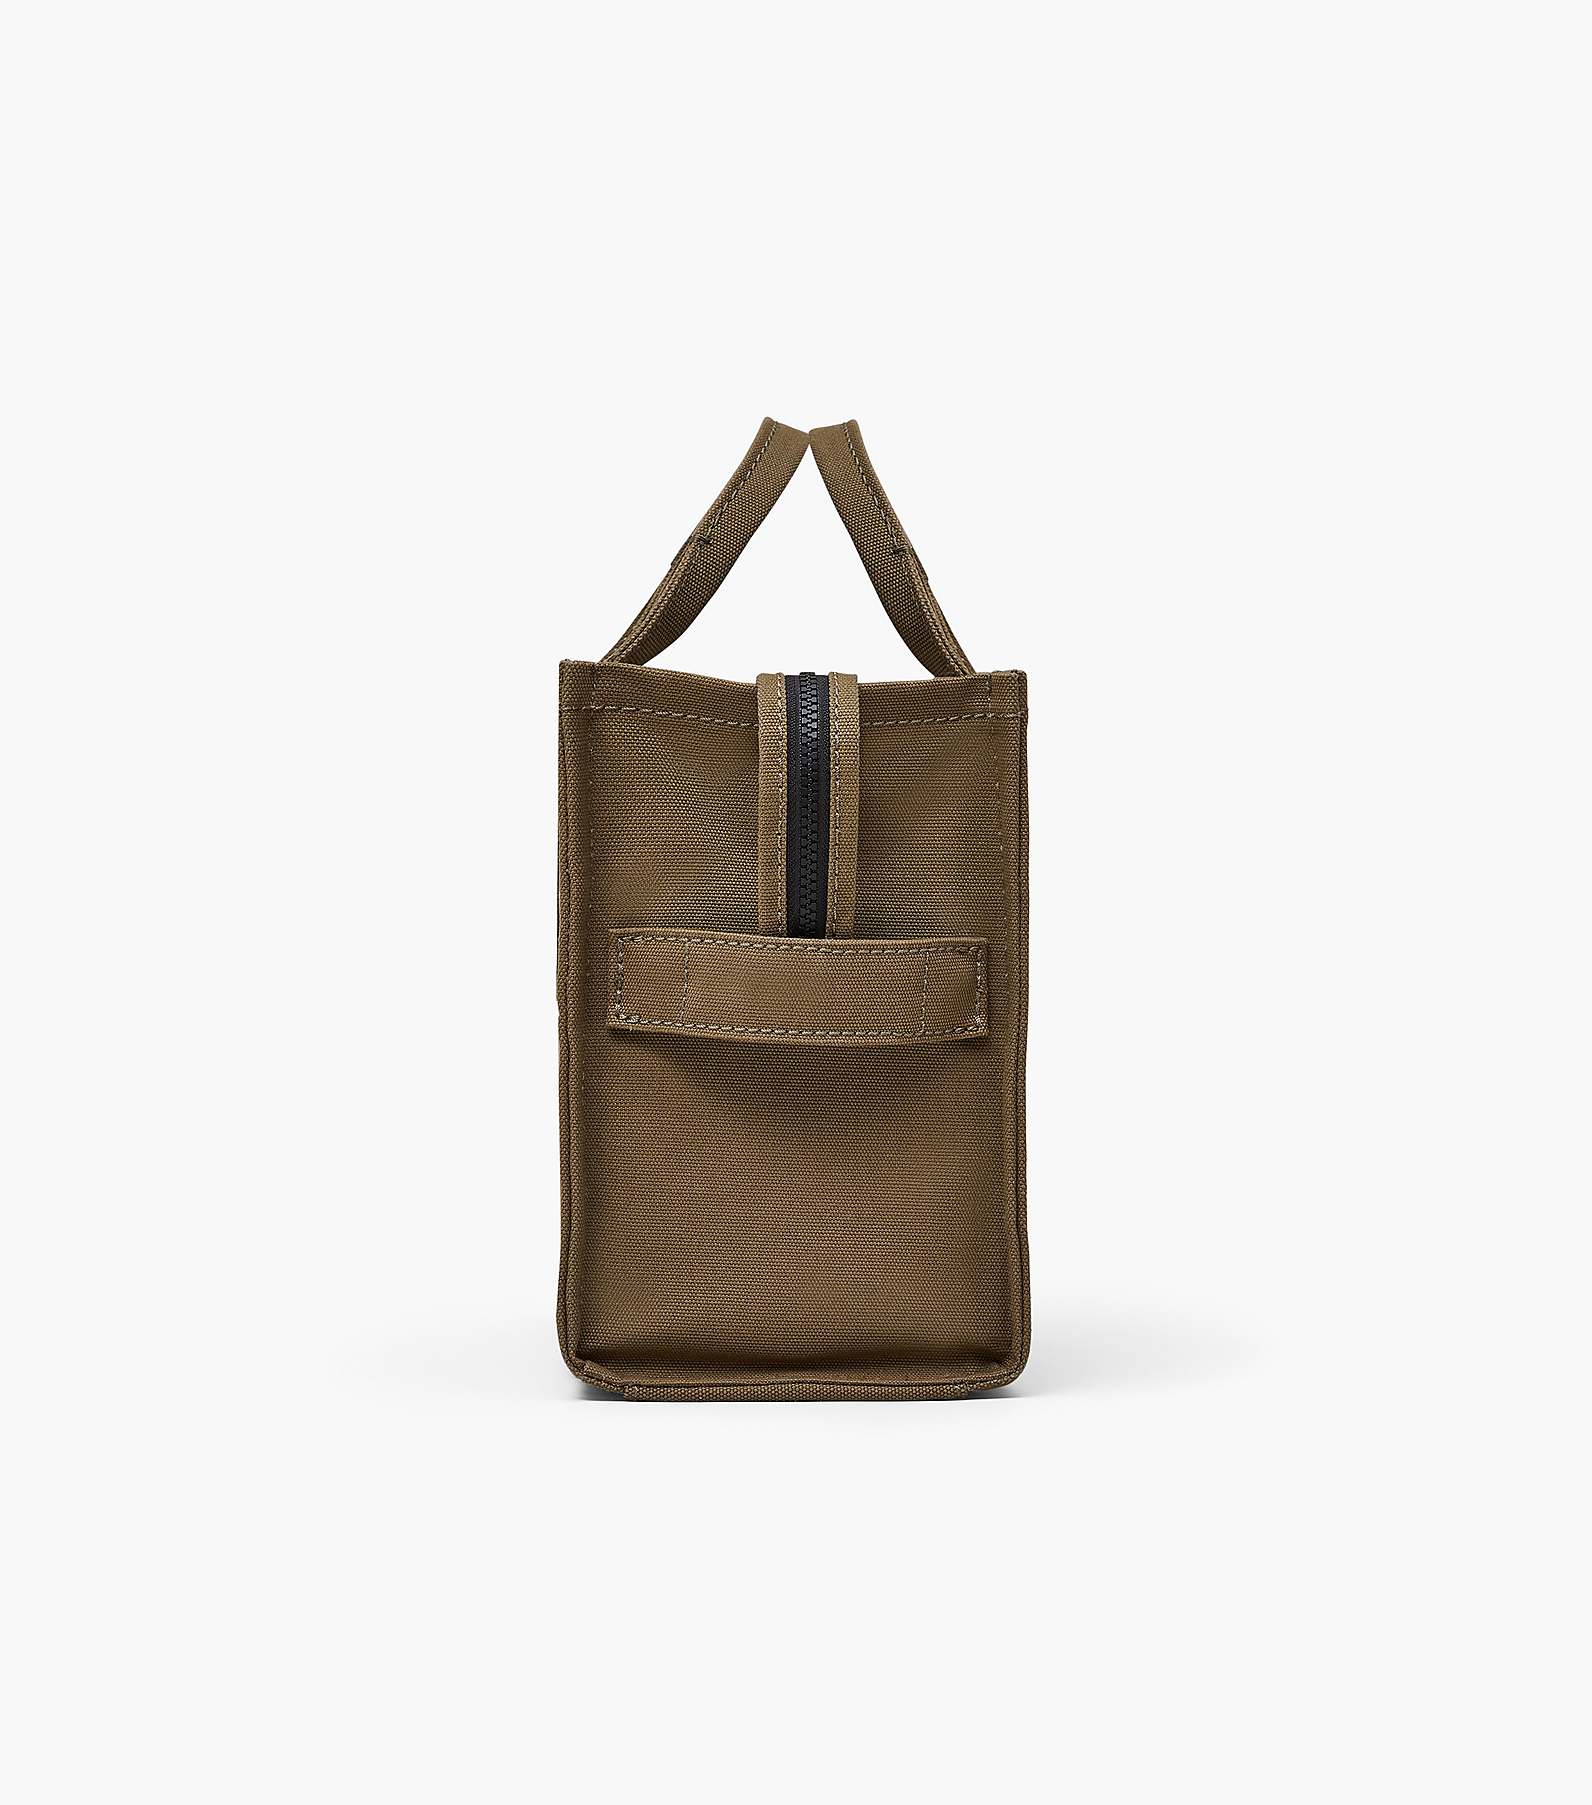 The Medium Tote Bag | Marc Jacobs | Official Site